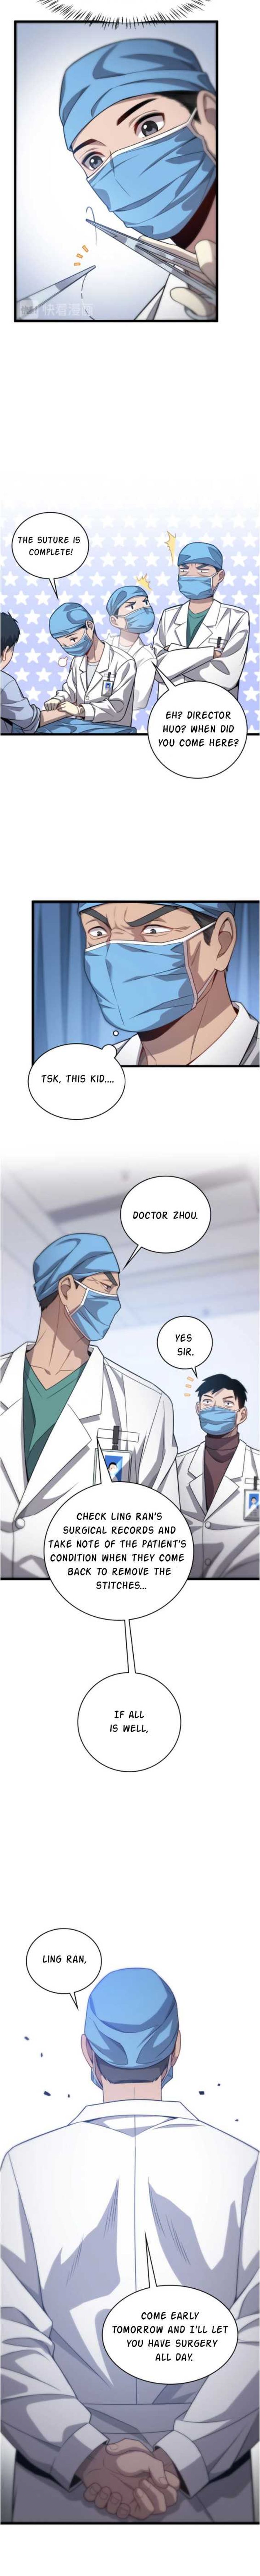 great_doctor_ling_ran_10_3